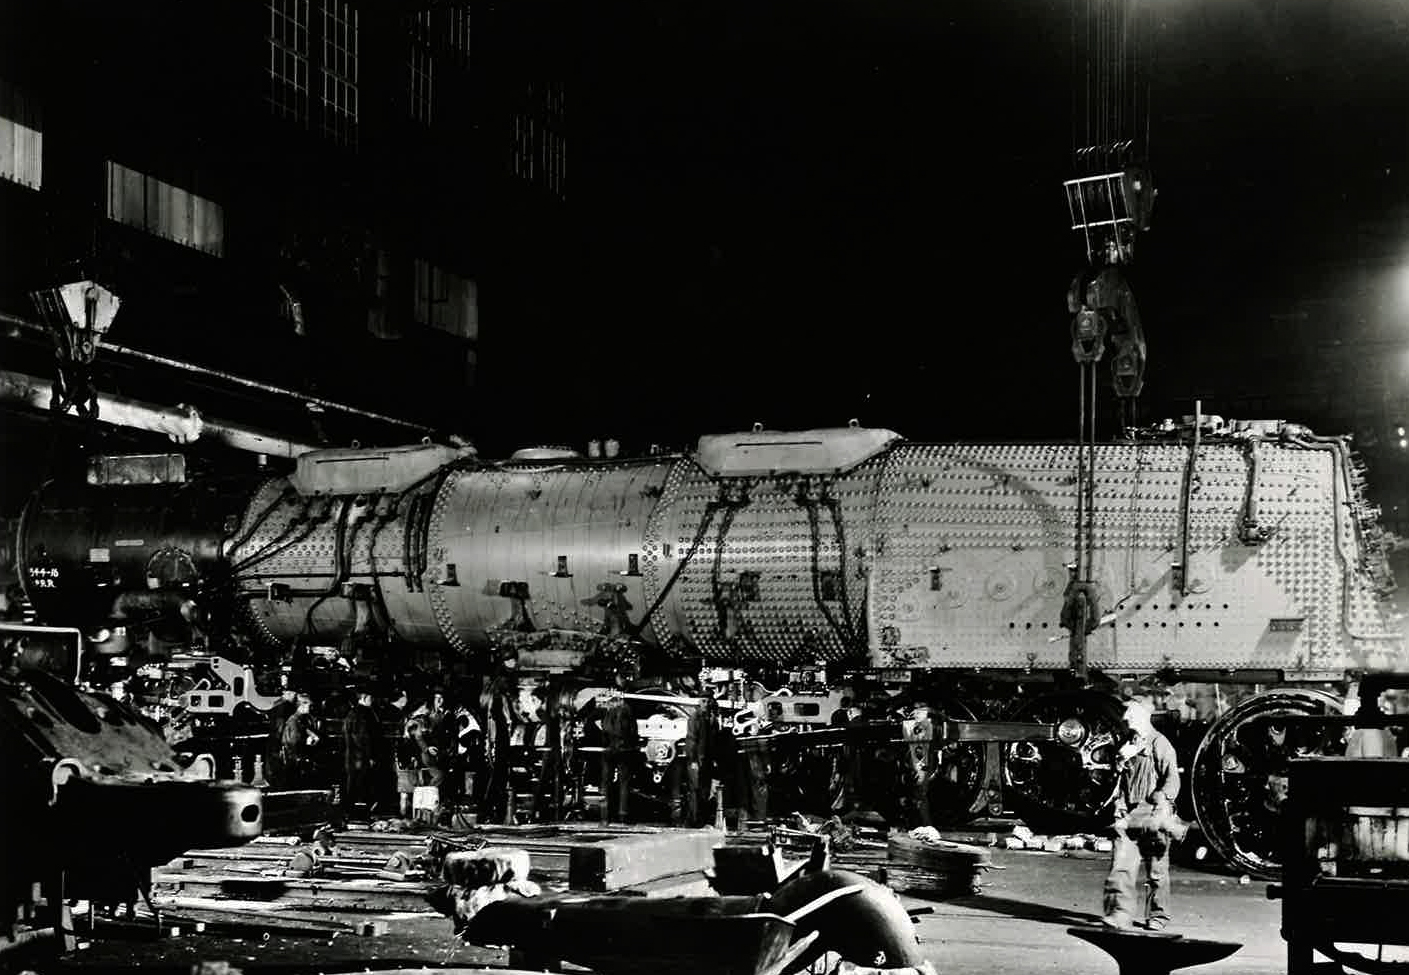 The boiler-smoker-firebox assembly of a Big Boy steam locomotive is lowered onto its wheels by an enormous interior crane.